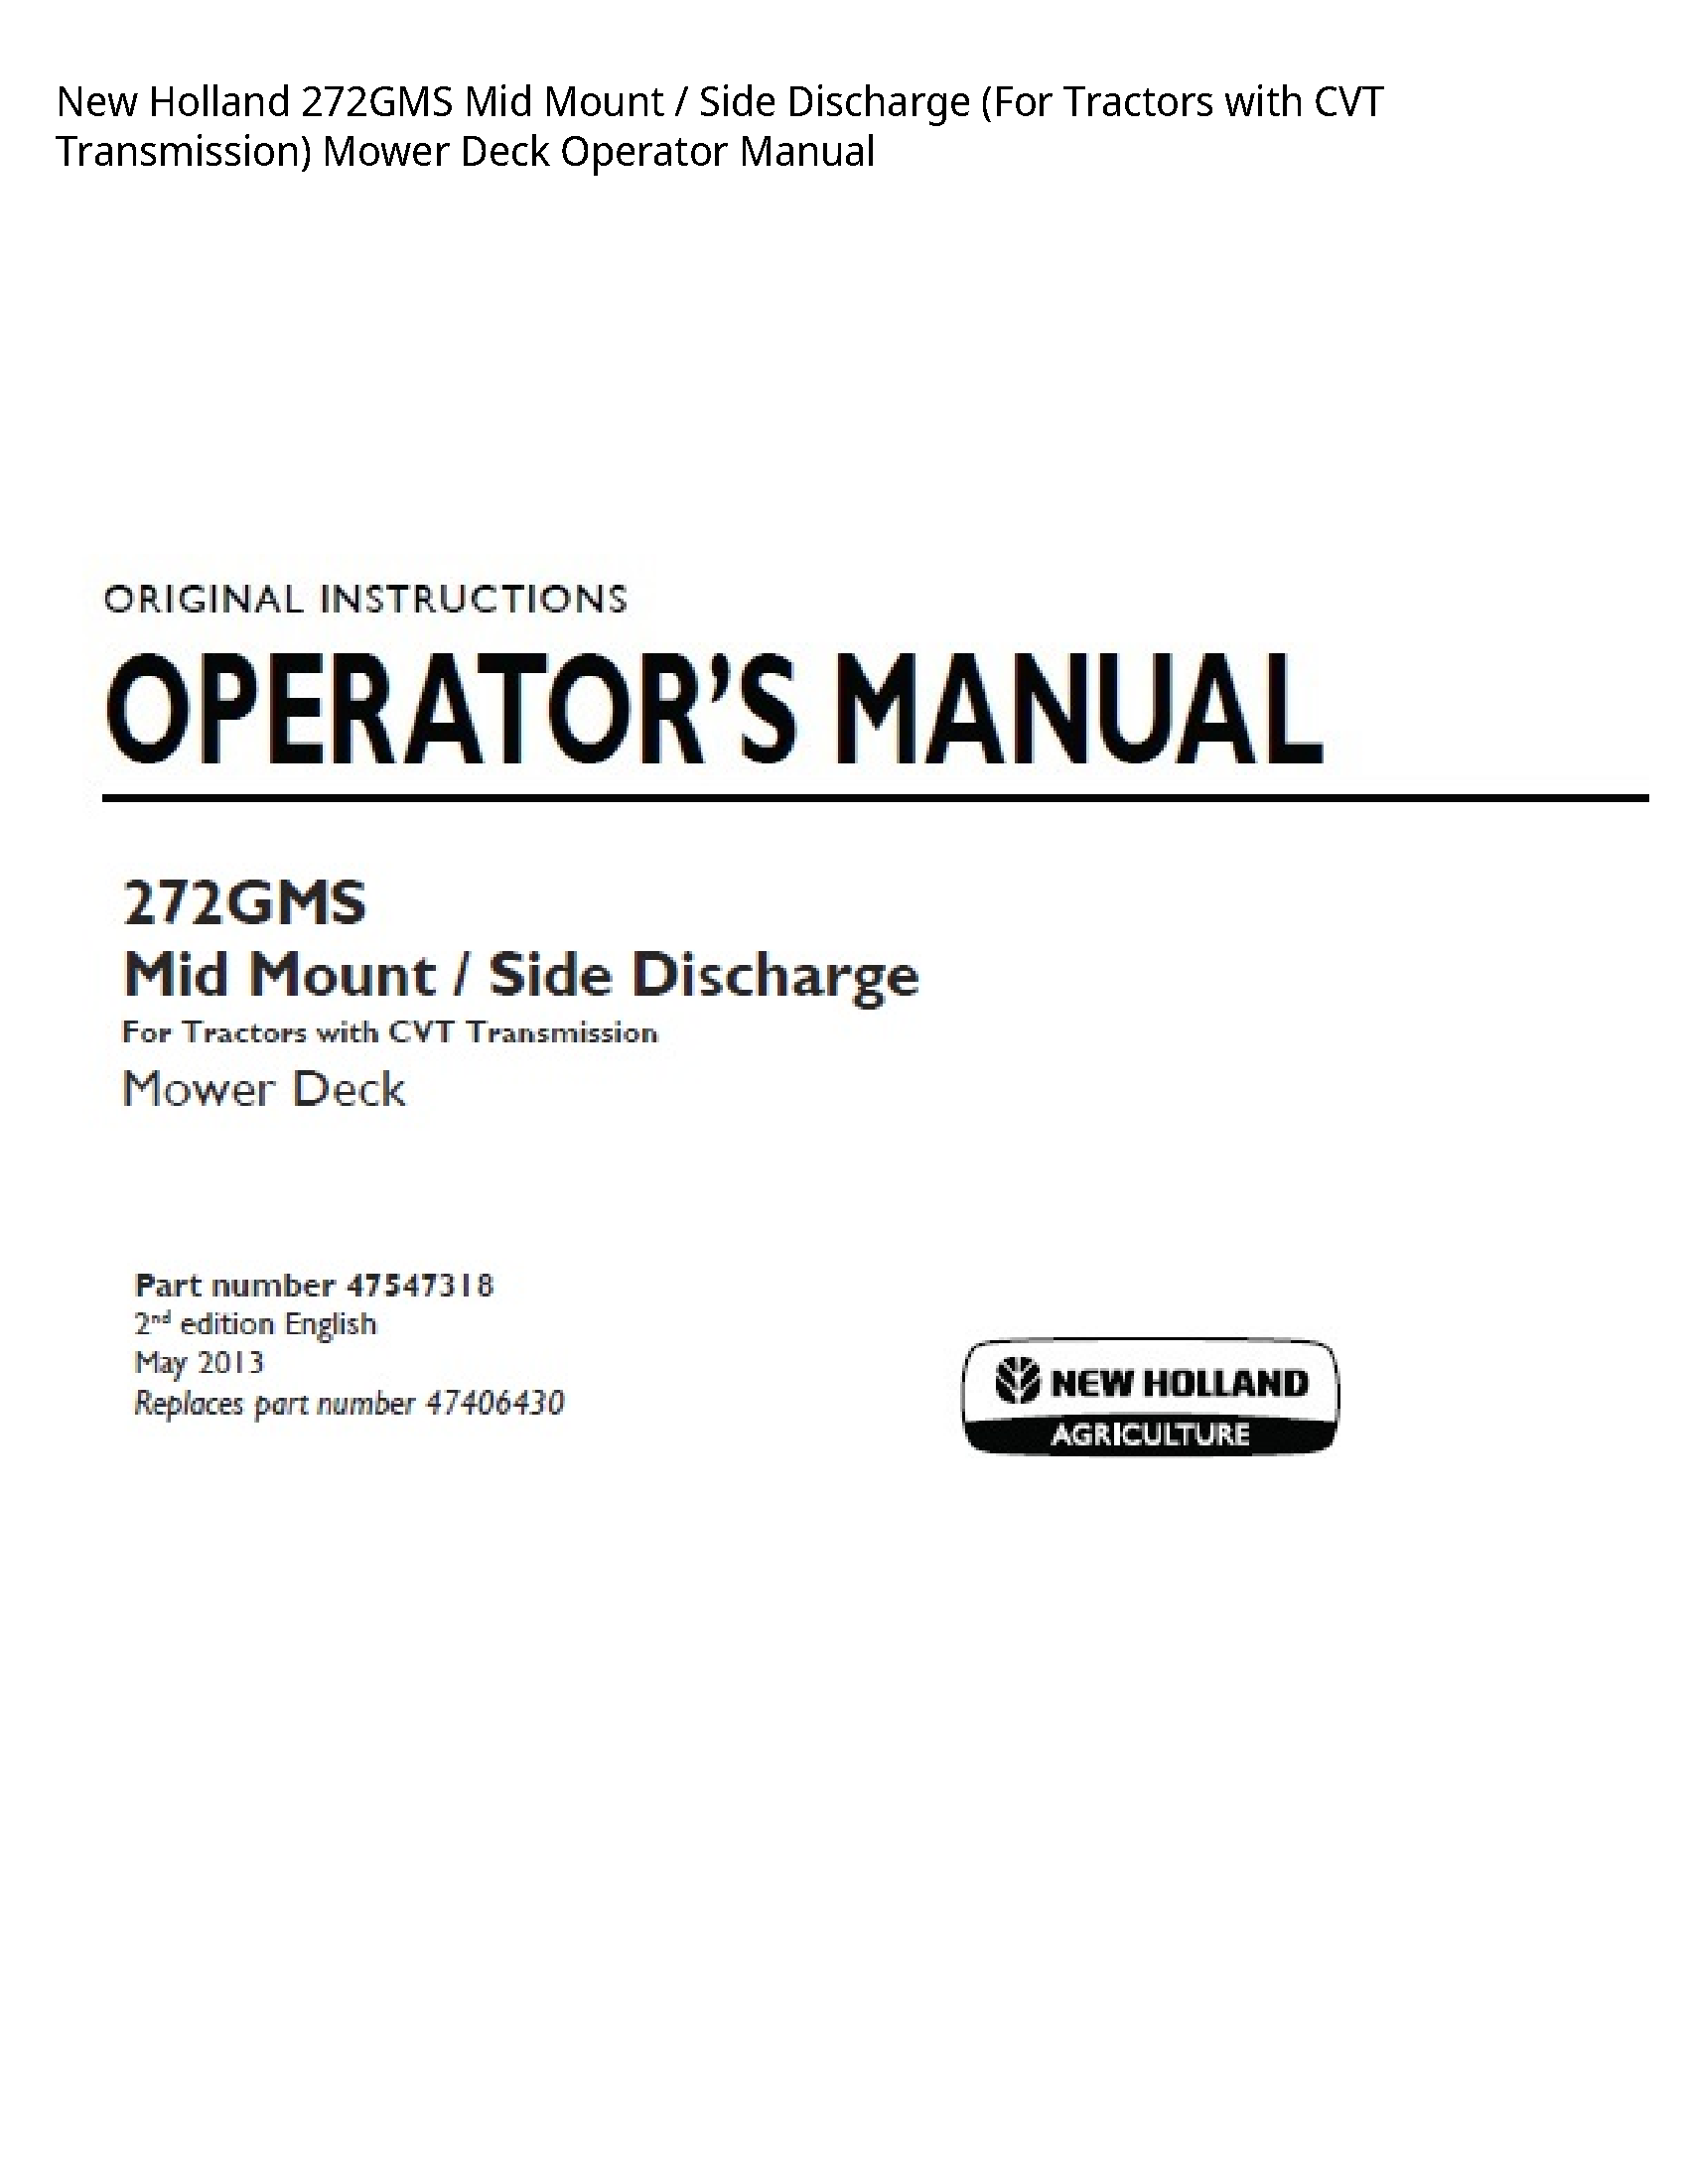 New Holland 272GMS Mid Mount Side Discharge (For Tractors with CVT Transmission) Mower Deck Operator manual